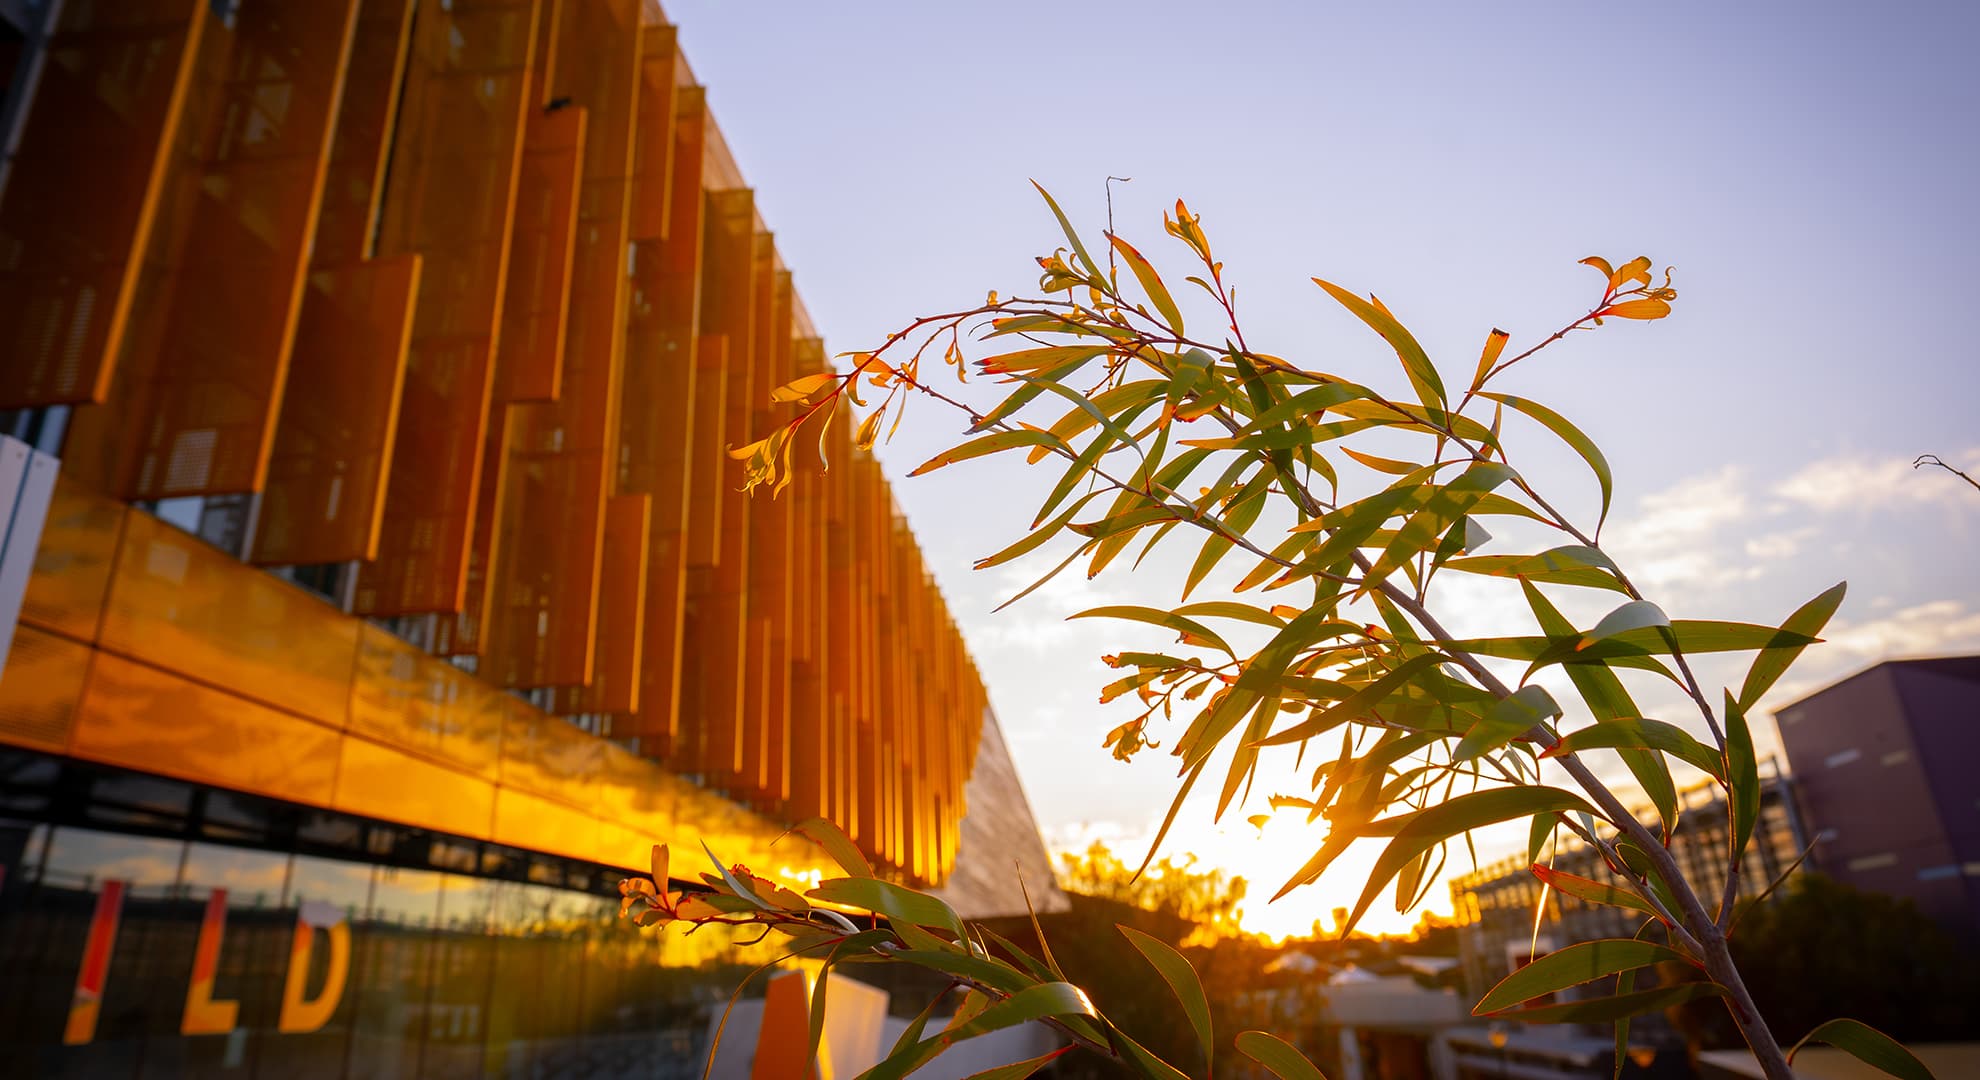 Joondalup campus building at sunrise with young eucalyptus branch in foreground.